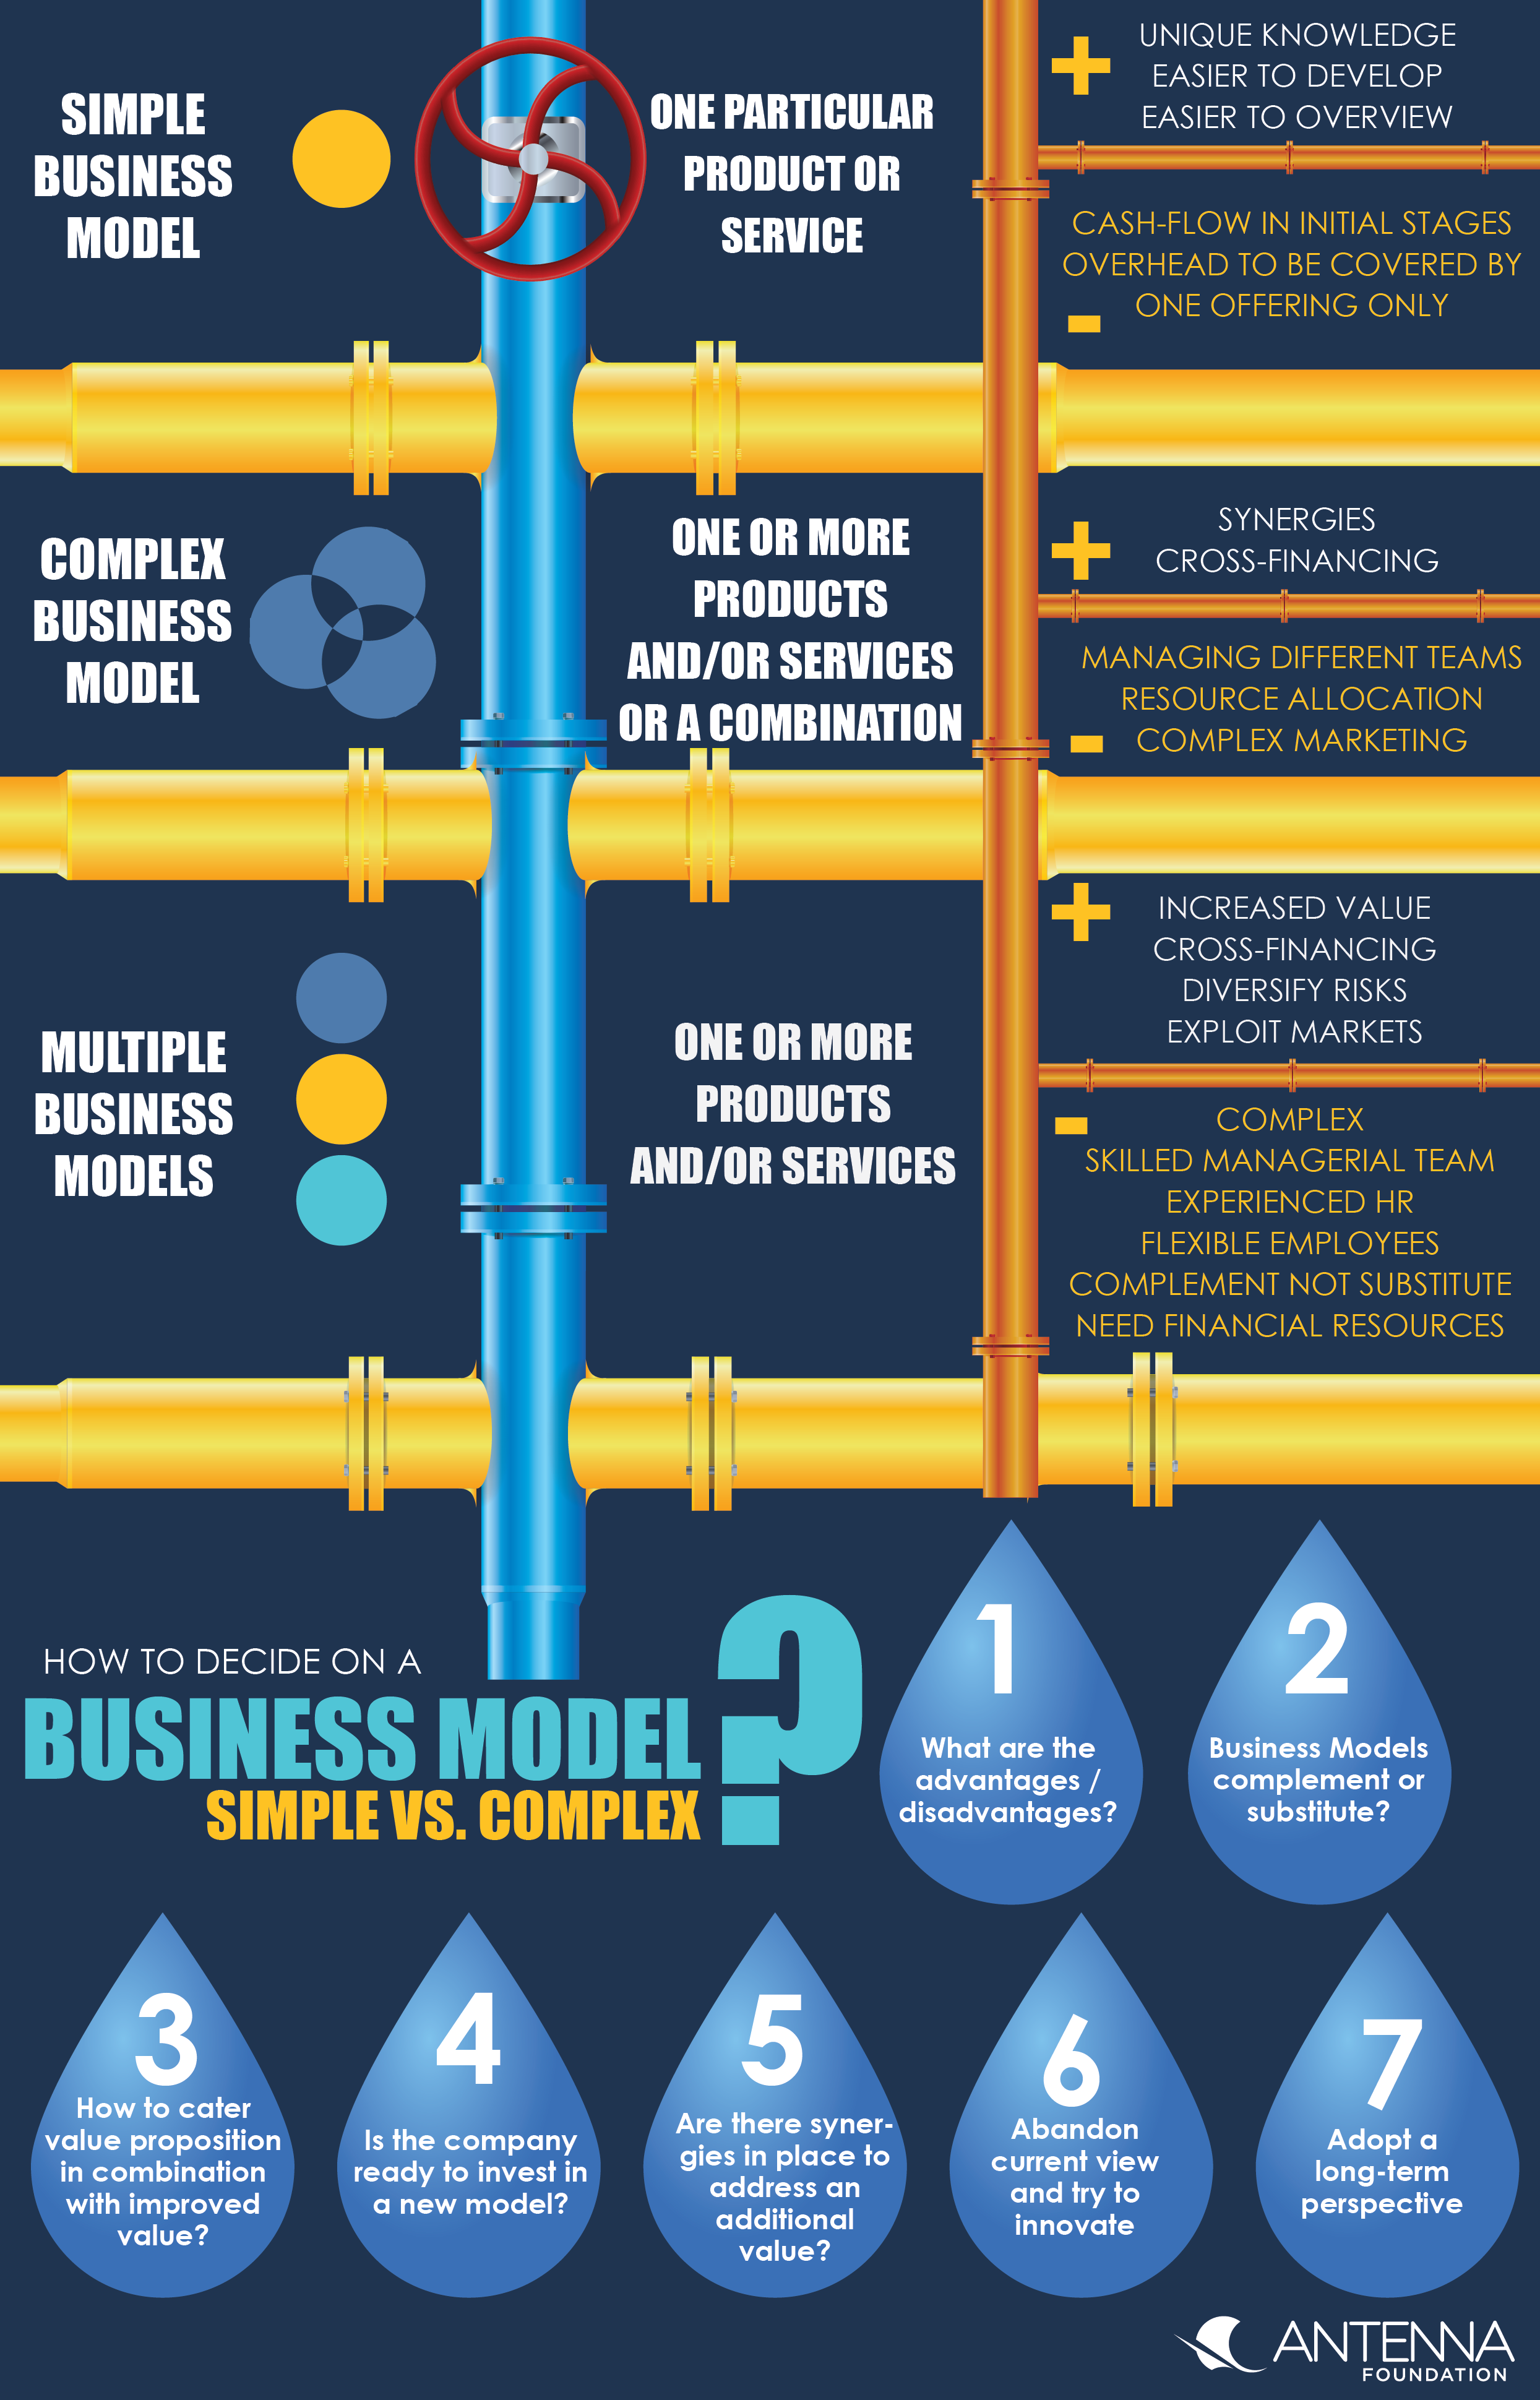 Simple and complex business models